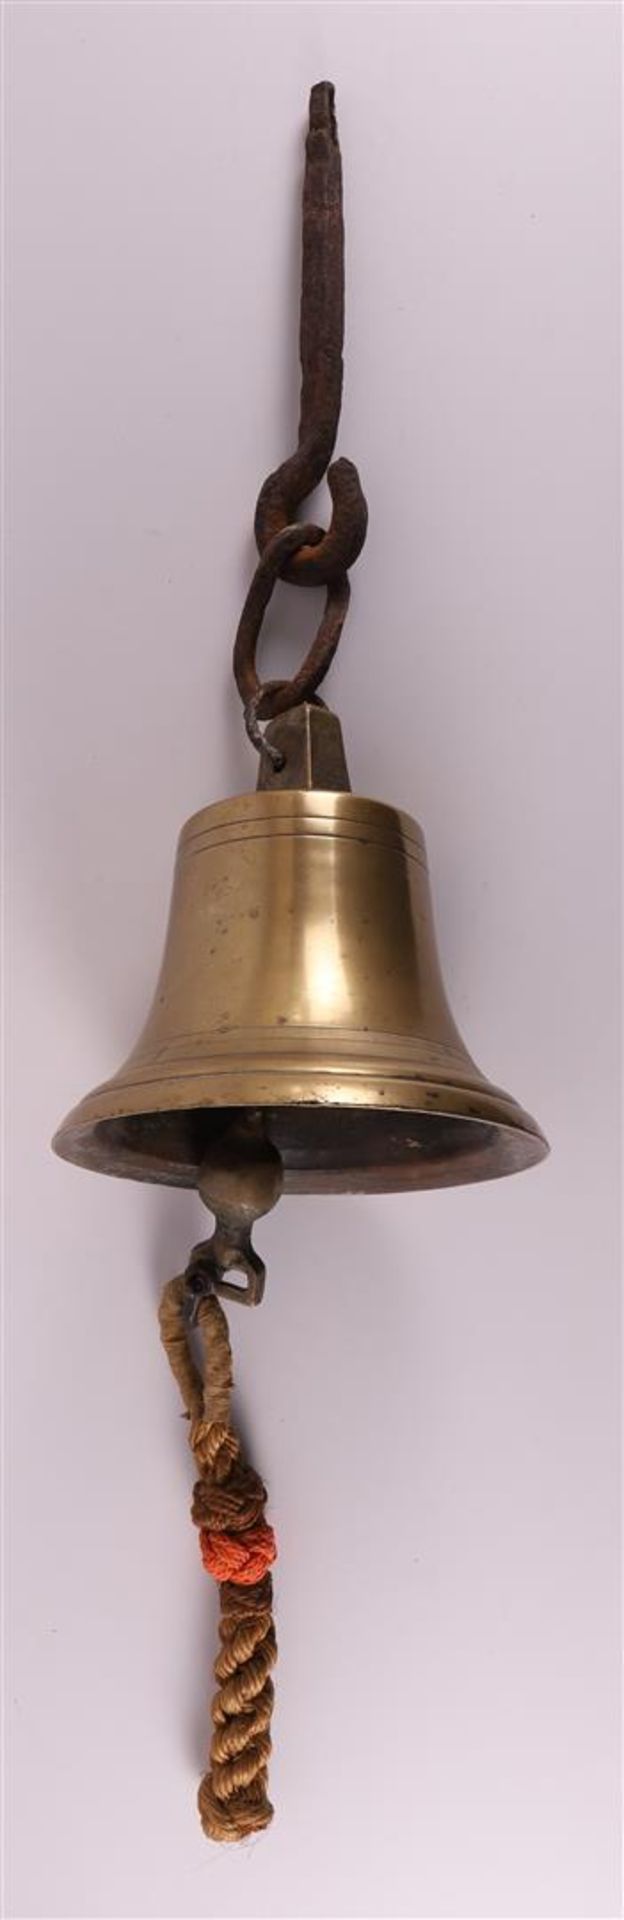 A bronze ship's bell, 1st half of the 20th century.